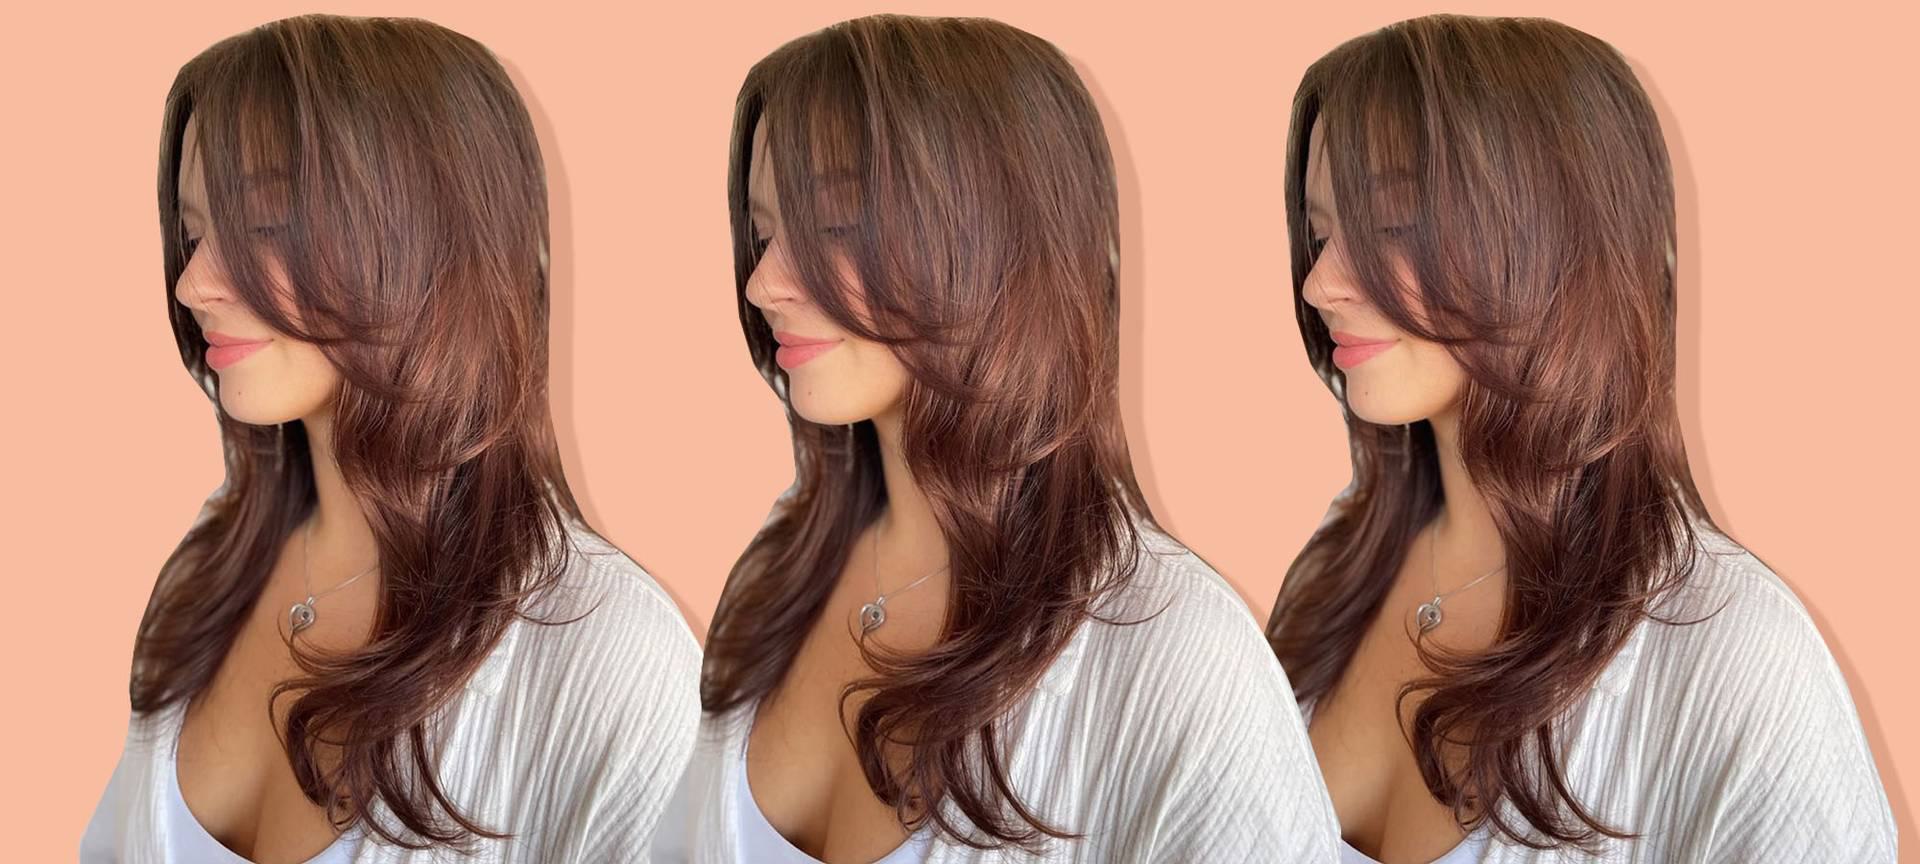  Butterfly Layers Haircut - A Stylish Choice for Women